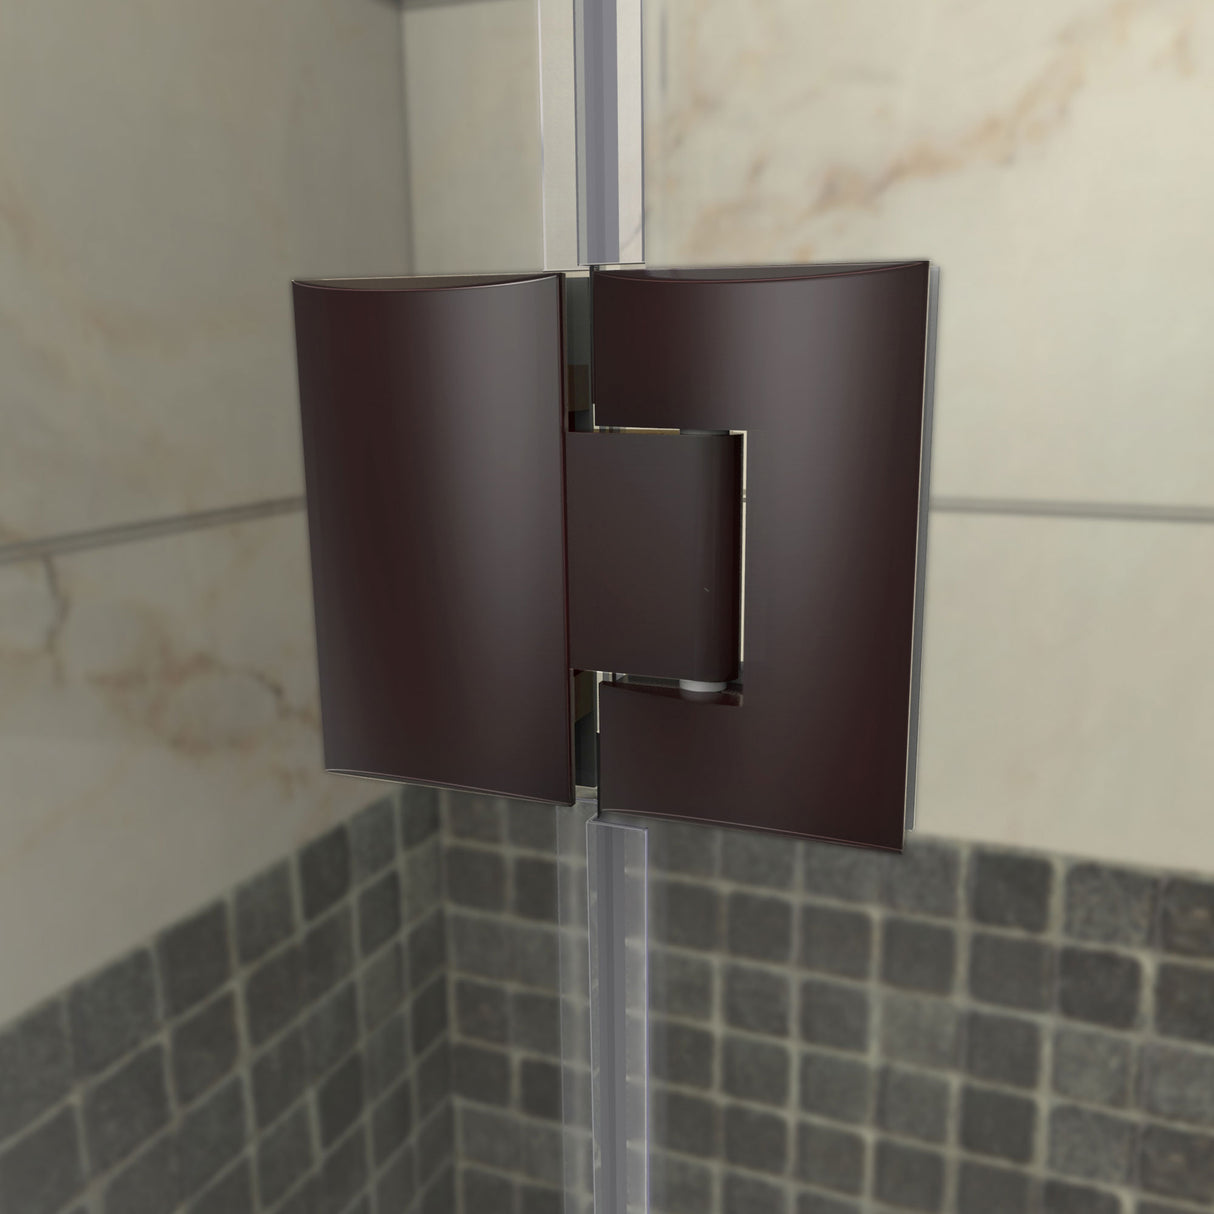 DreamLine Unidoor-X 69 1/2 in. W x 30 3/8 in. D x 72 in. H Frameless Hinged Shower Enclosure in Oil Rubbed Bronze